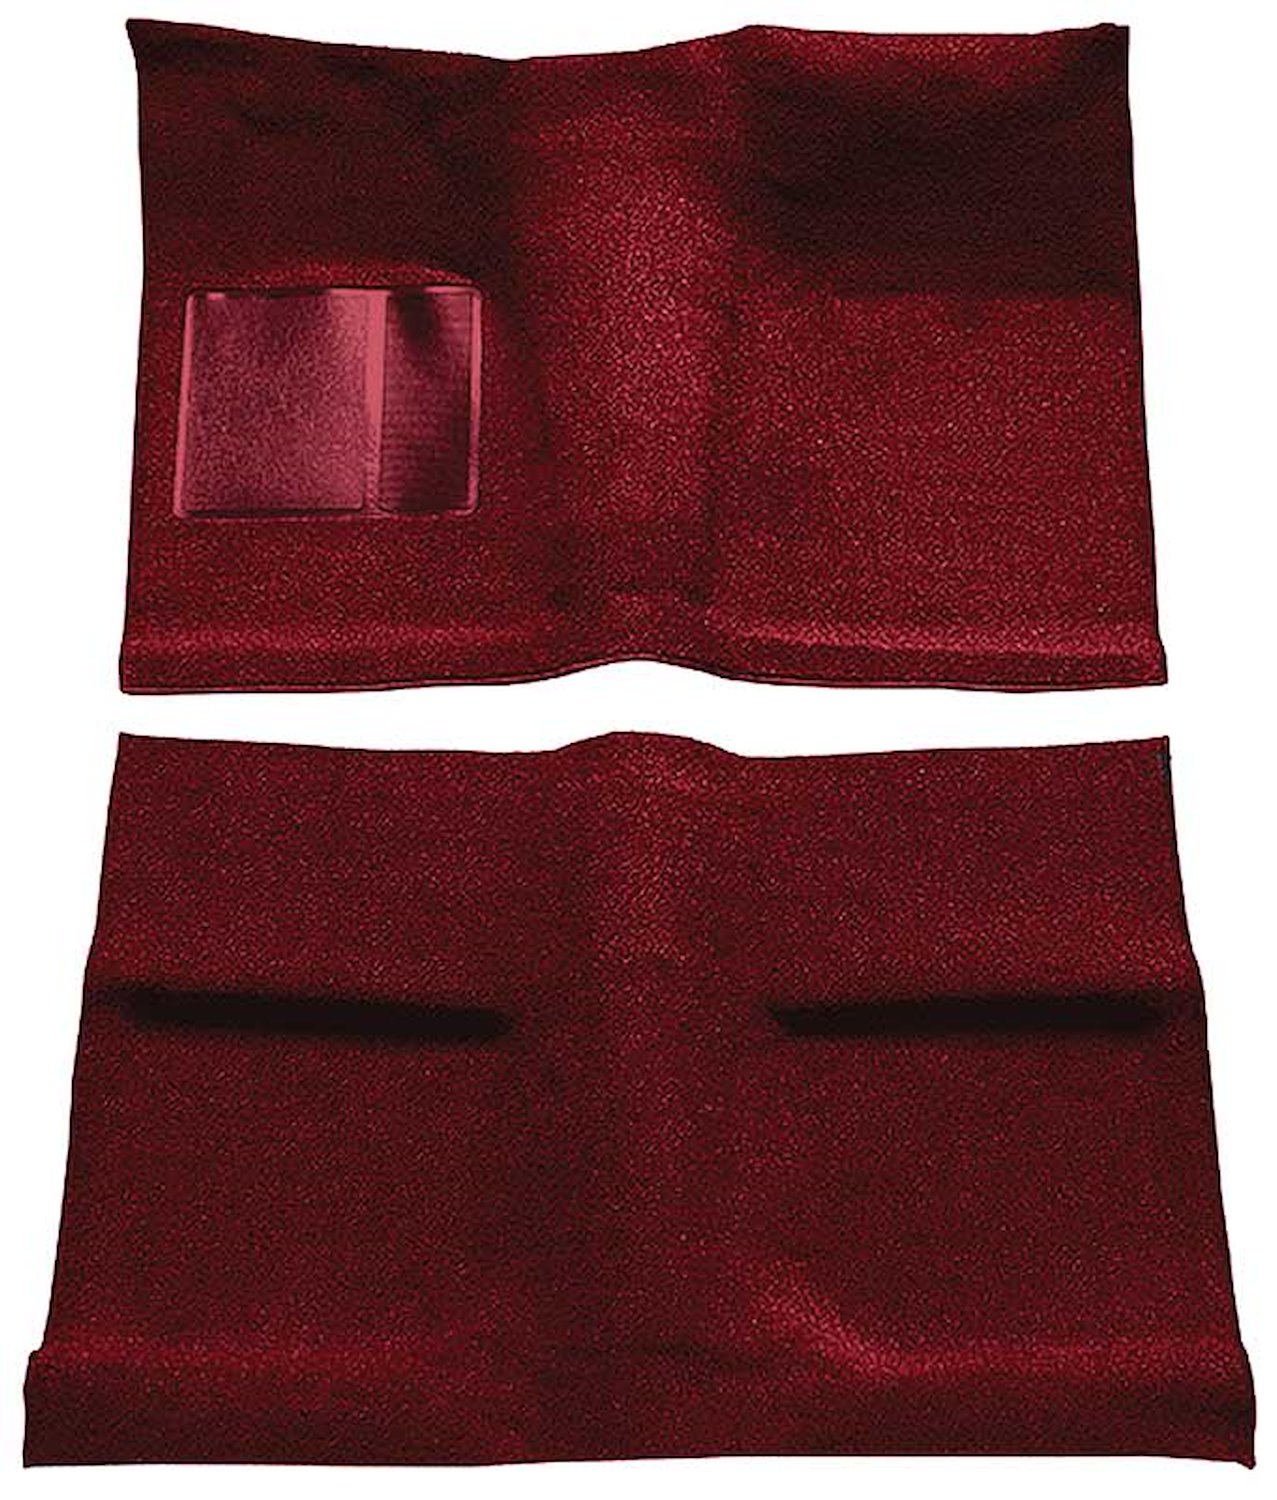 A4031B15 Passenger Area Nylon Loop Floor Carpet Set With Mass Backing 1964 Mustang Coupe; Maroon